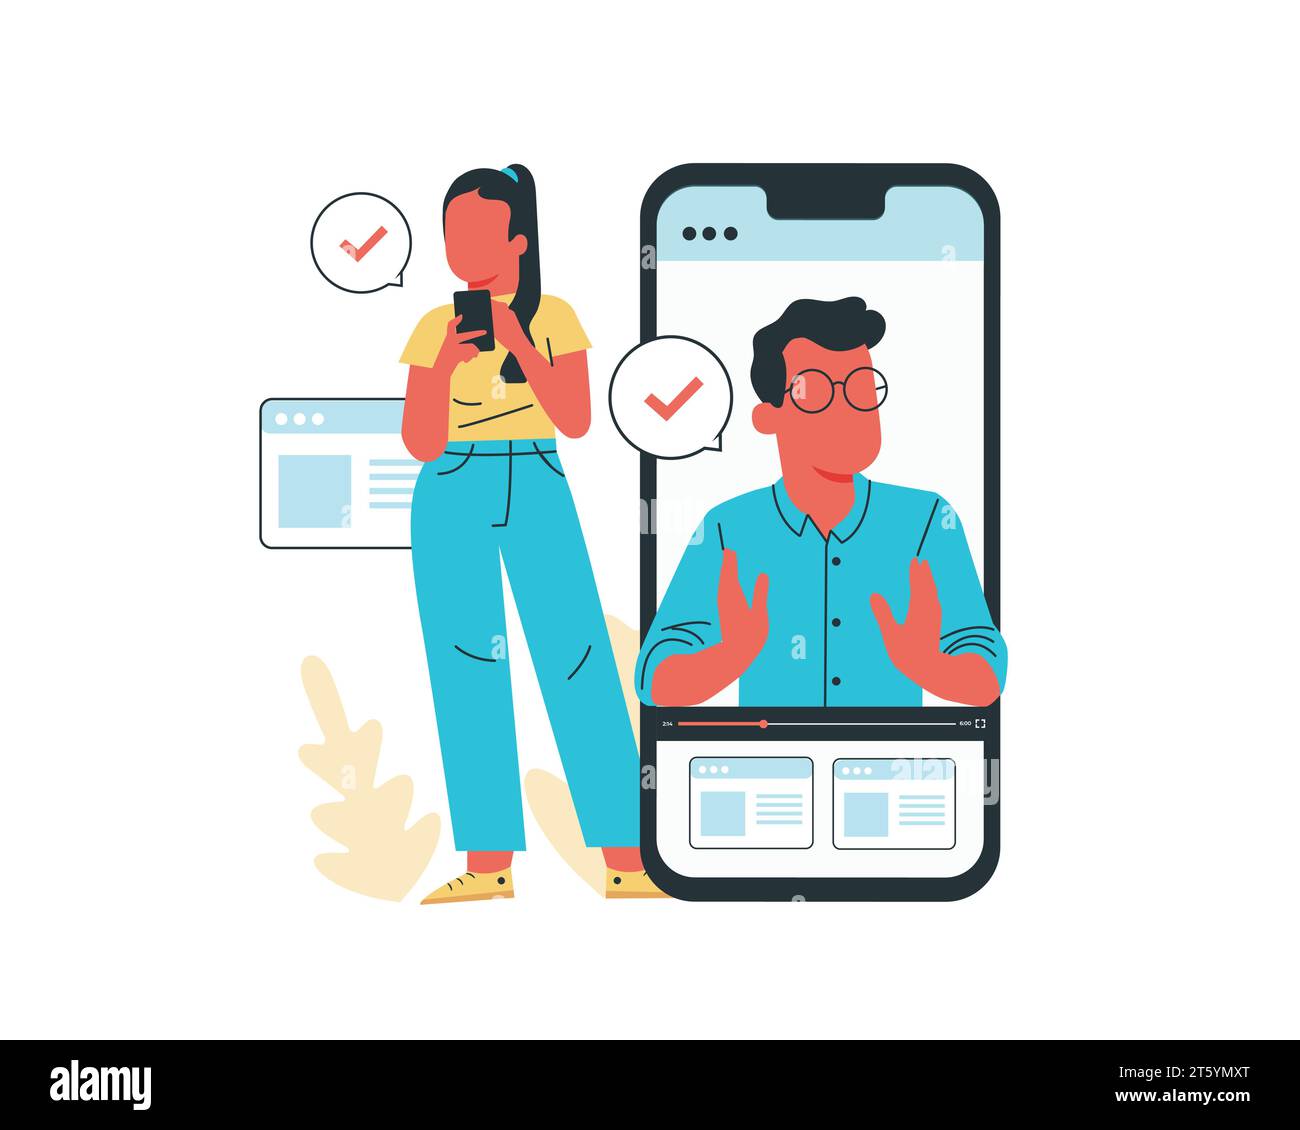 young Man and woman using mobile phone for communication. Vector illustration in flat cartoon style on white background. Stock Vector